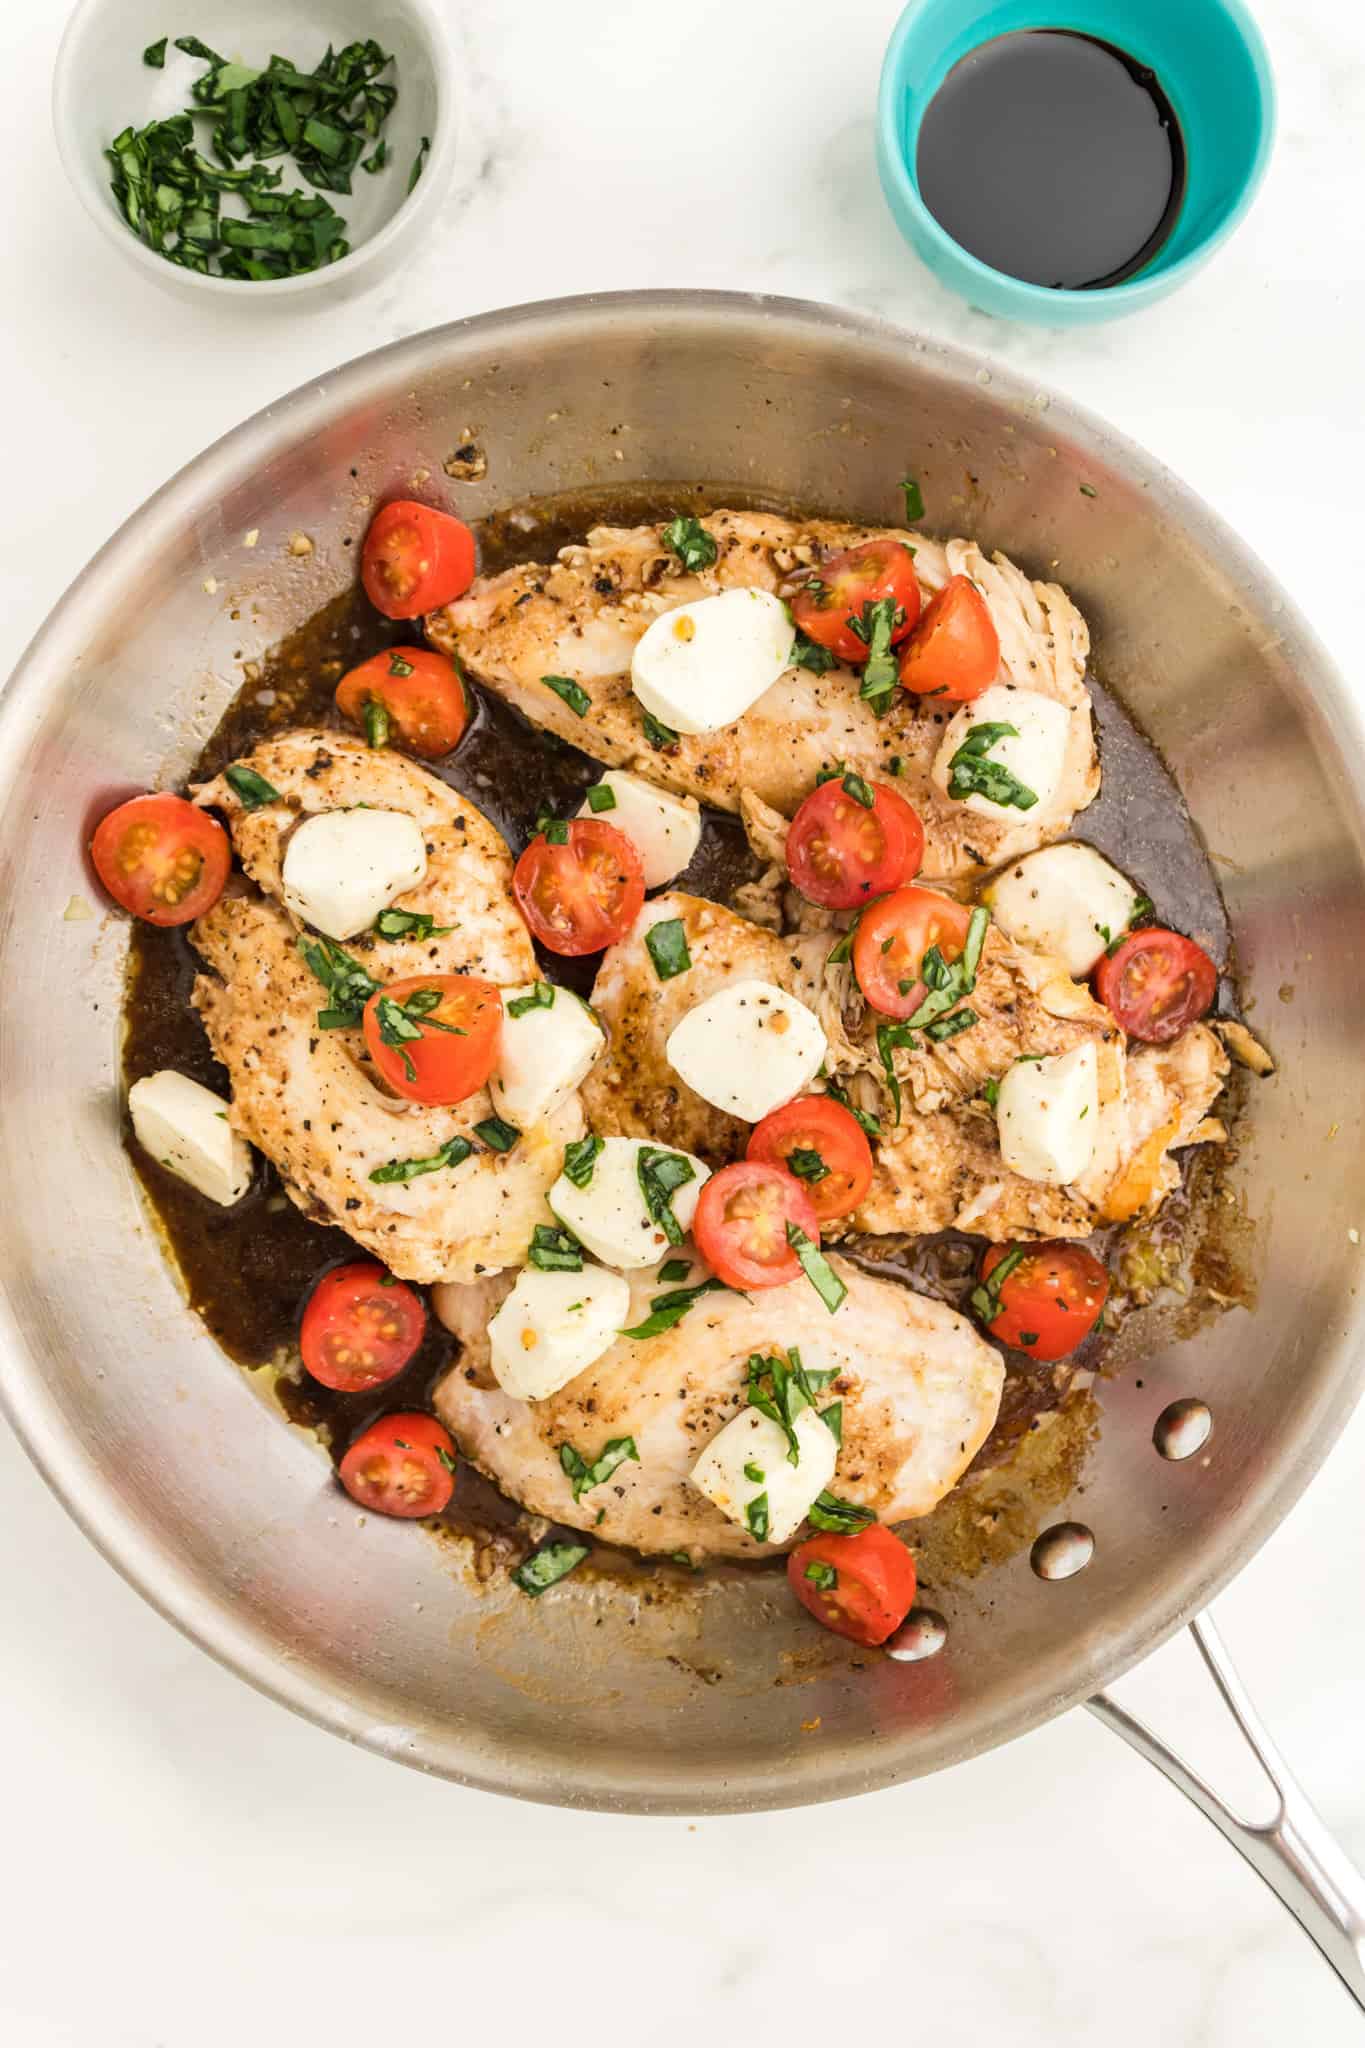 Caprese Chicken is a delicious chicken dish loaded with cherry tomatoes, fresh mozzarella, basil and balsamic vinaigrette.